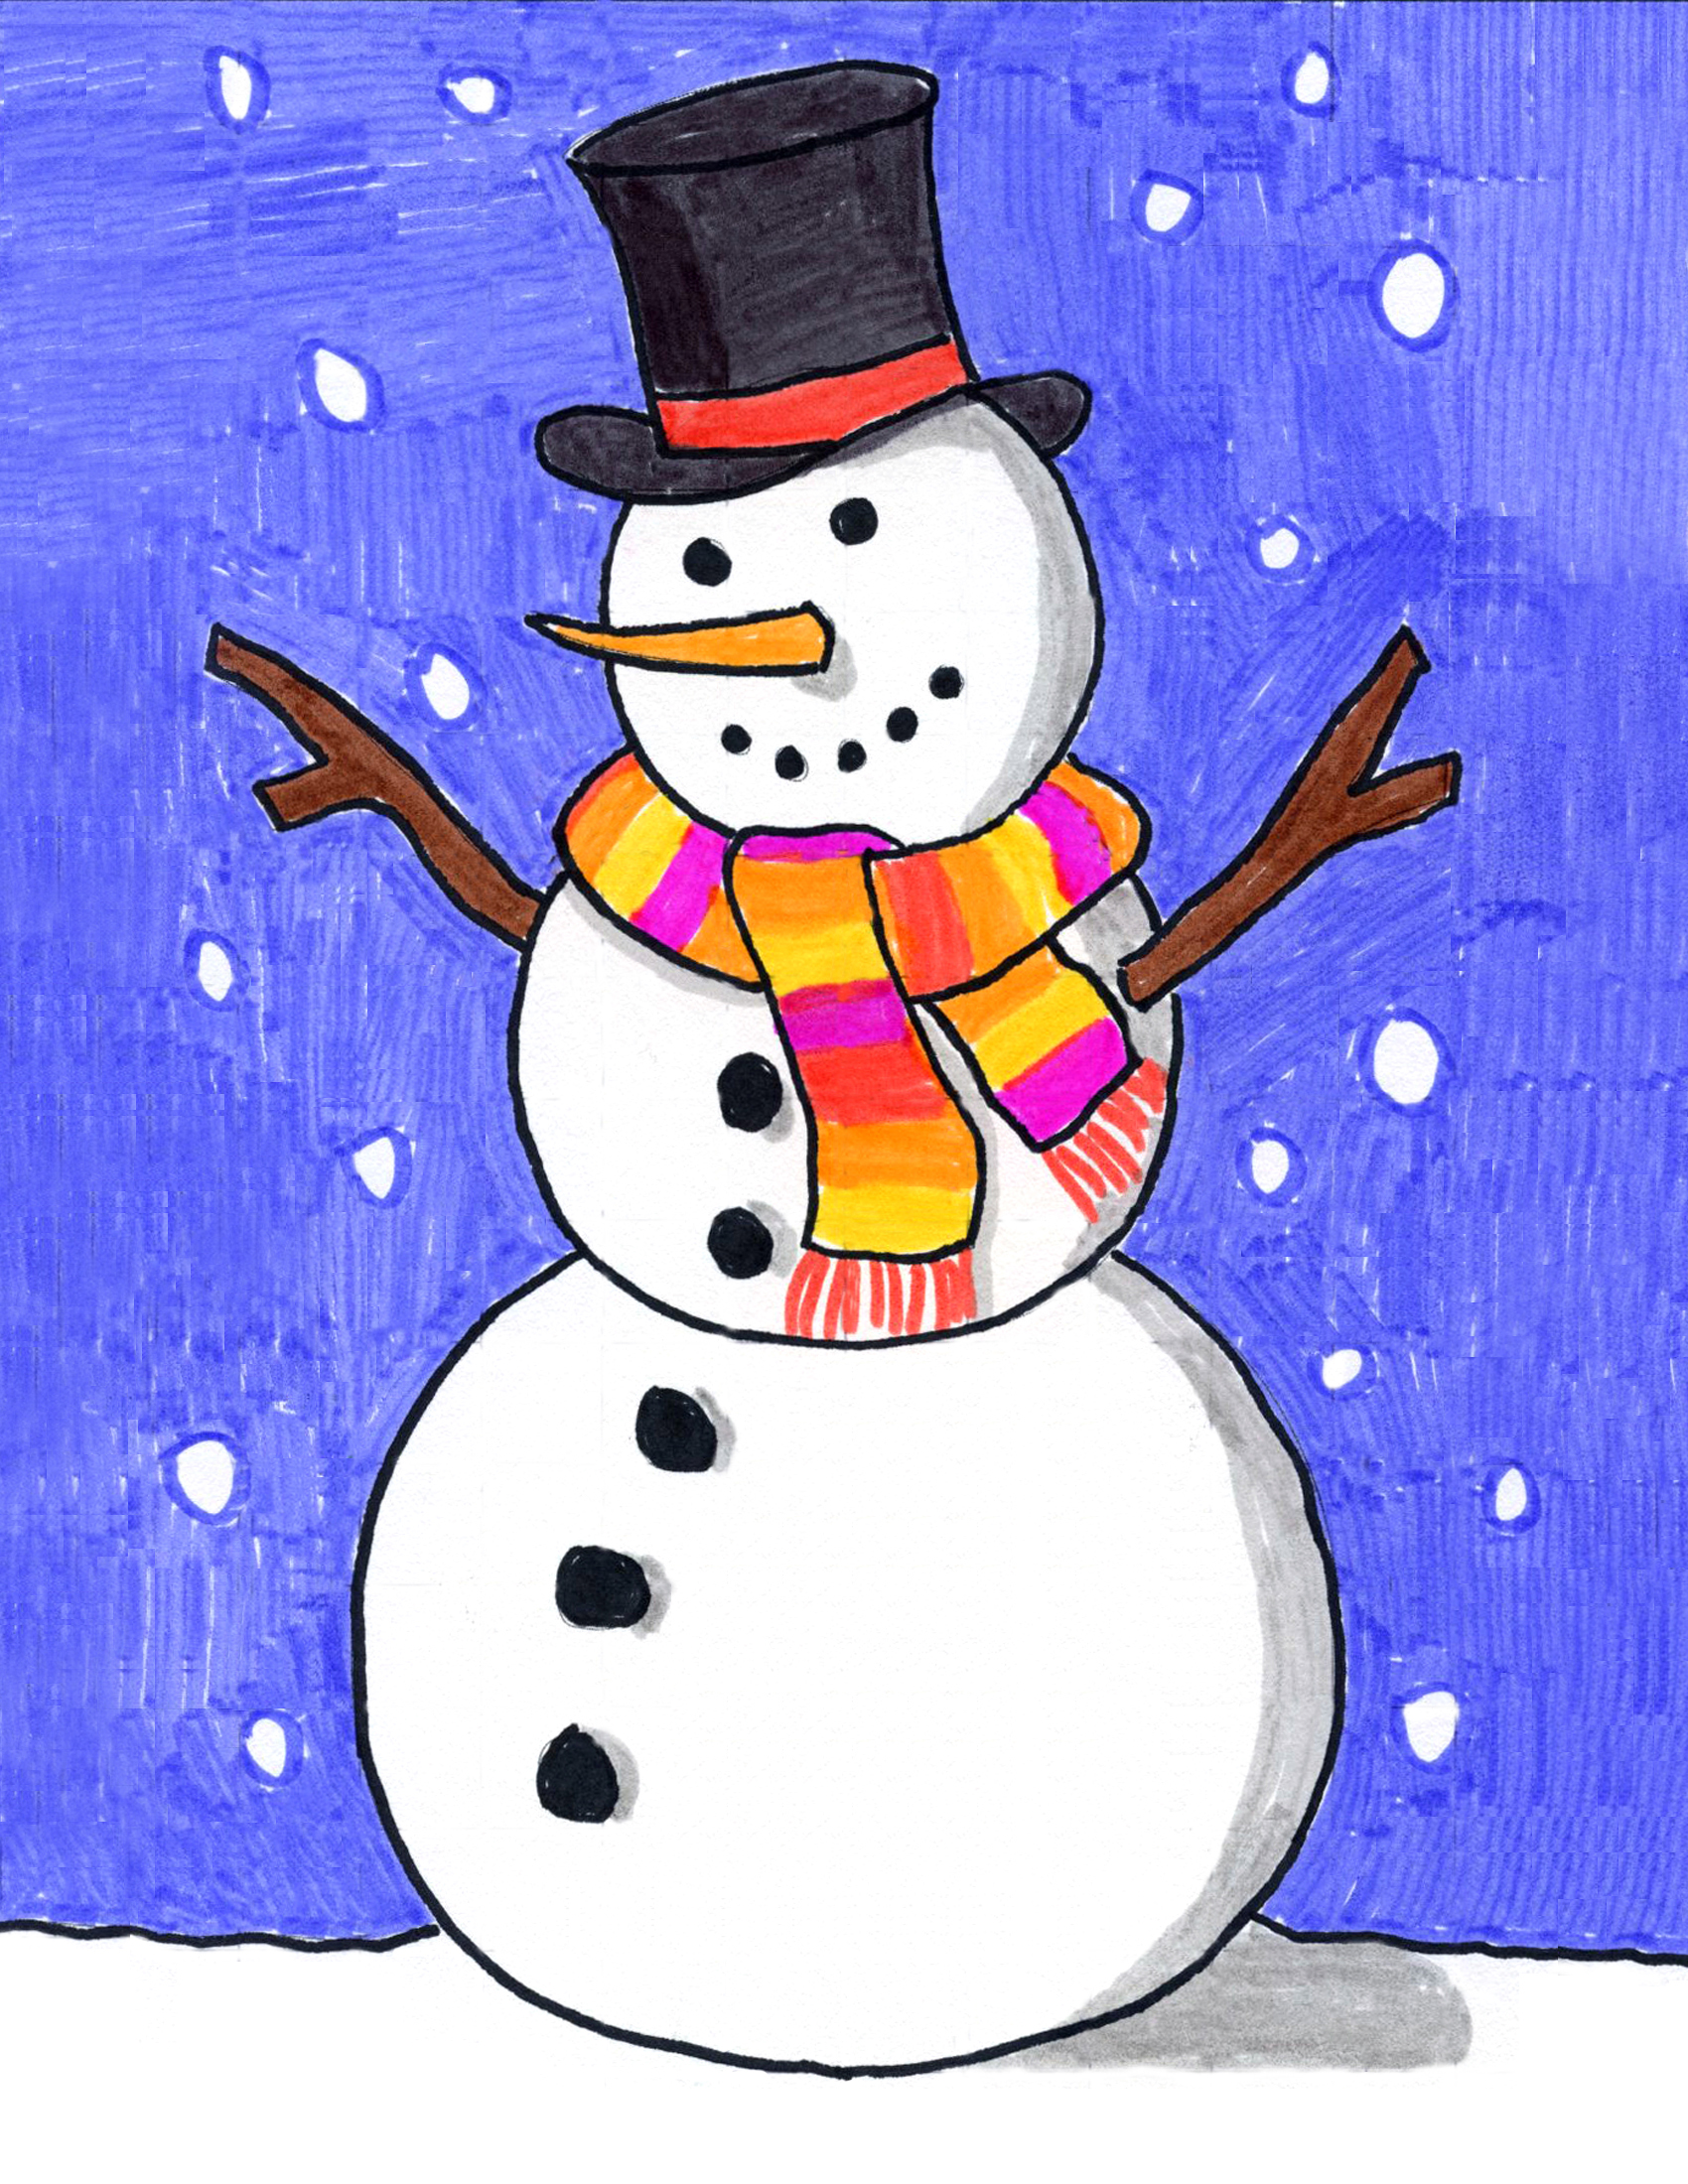 How to Draw a Snowman · Art Projects for Kids